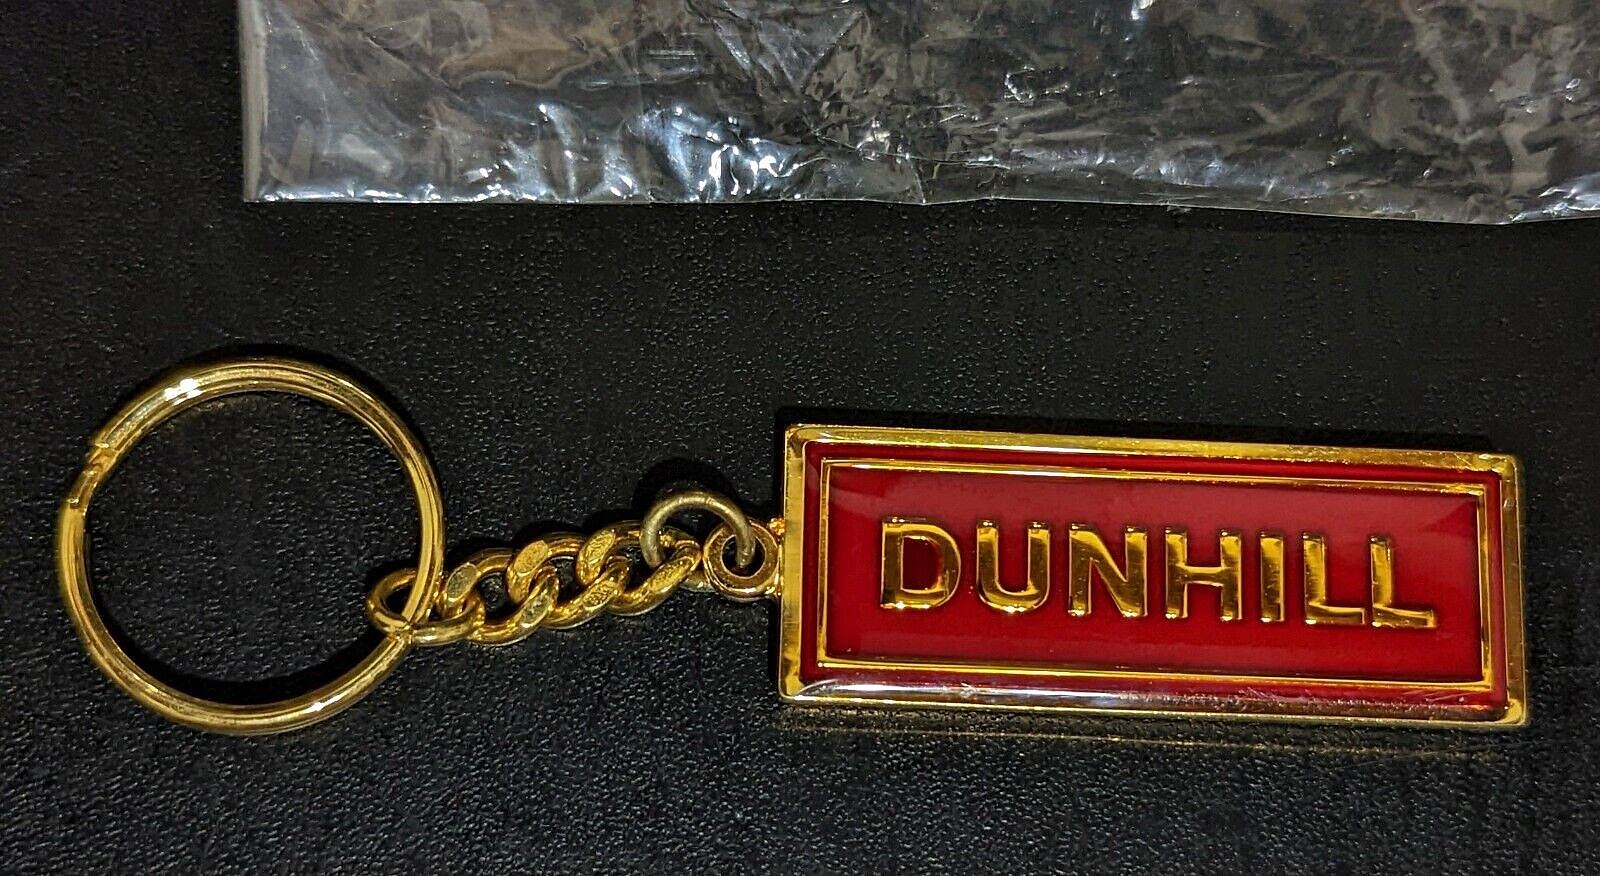 DUNHILL RED & GOLD PIPE CIGAR CIGARETTE TOBACCO KEYCHAIN FOB KEY RING CHAIN - $30.00